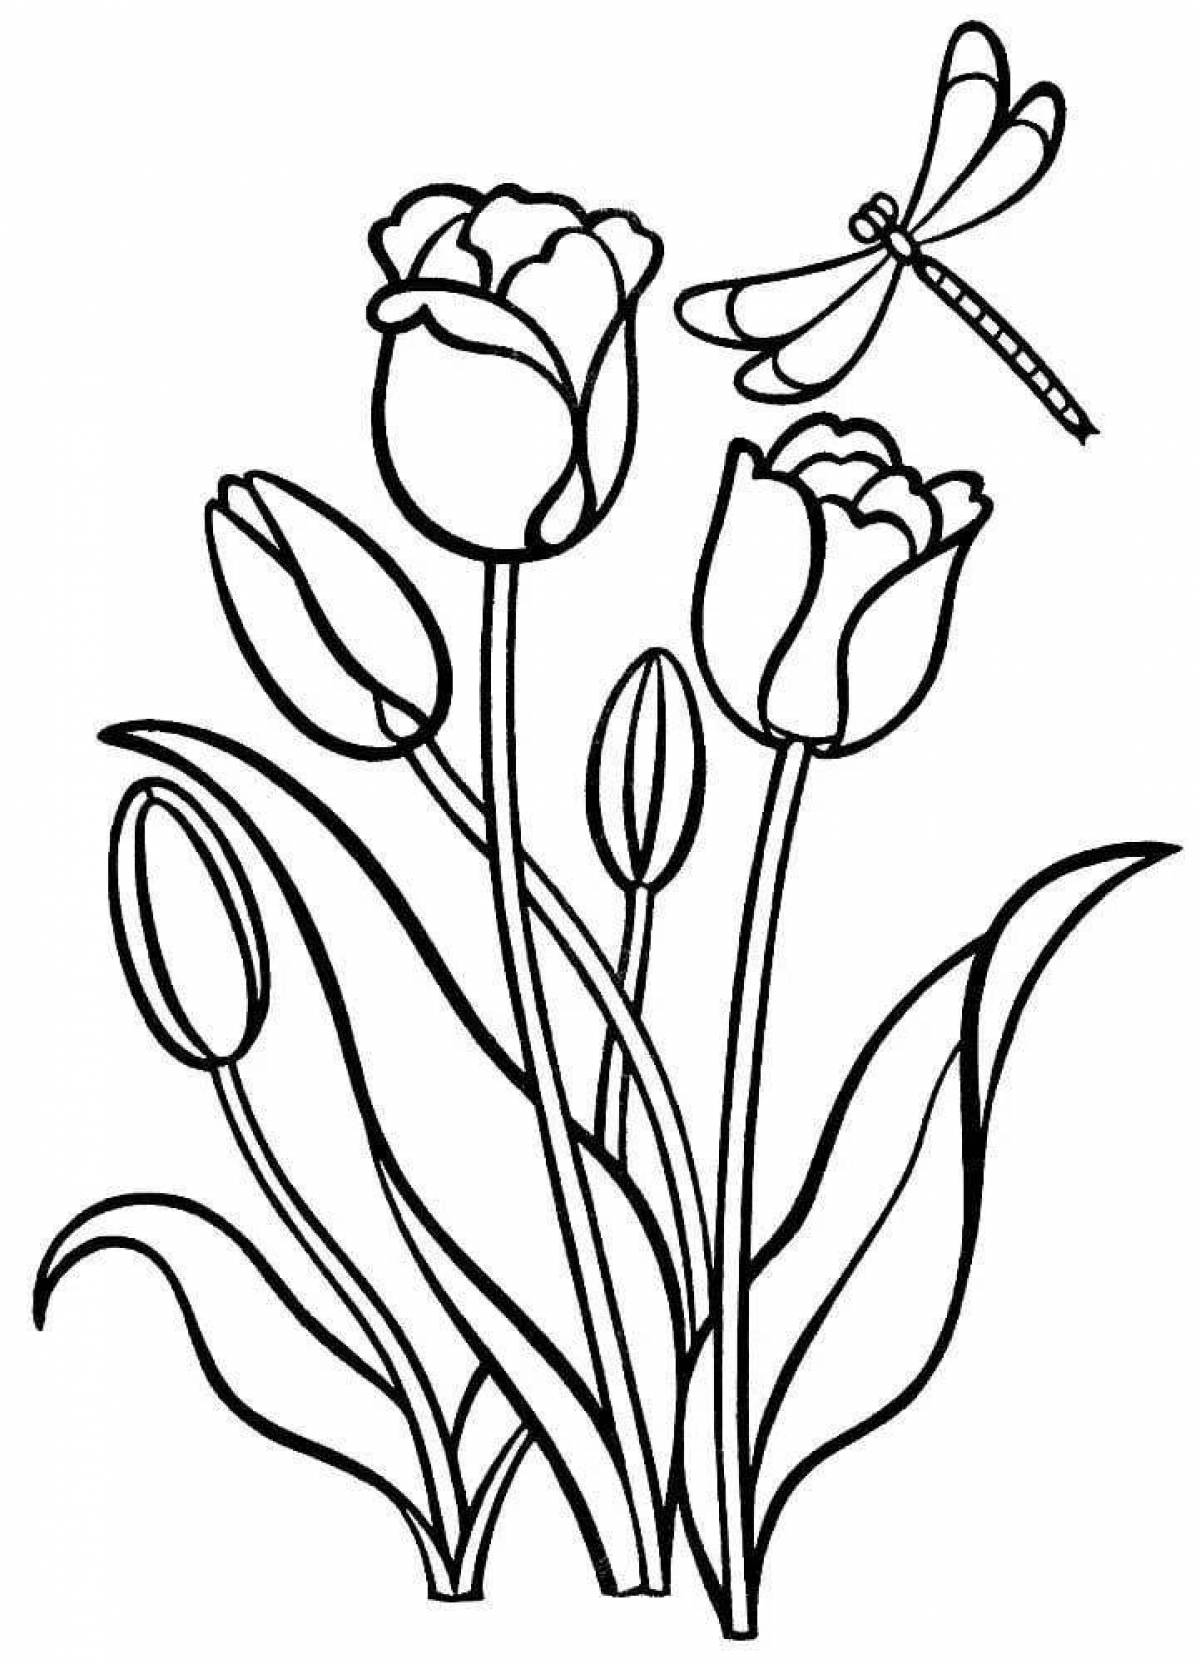 Gorgeous spring flowers coloring book